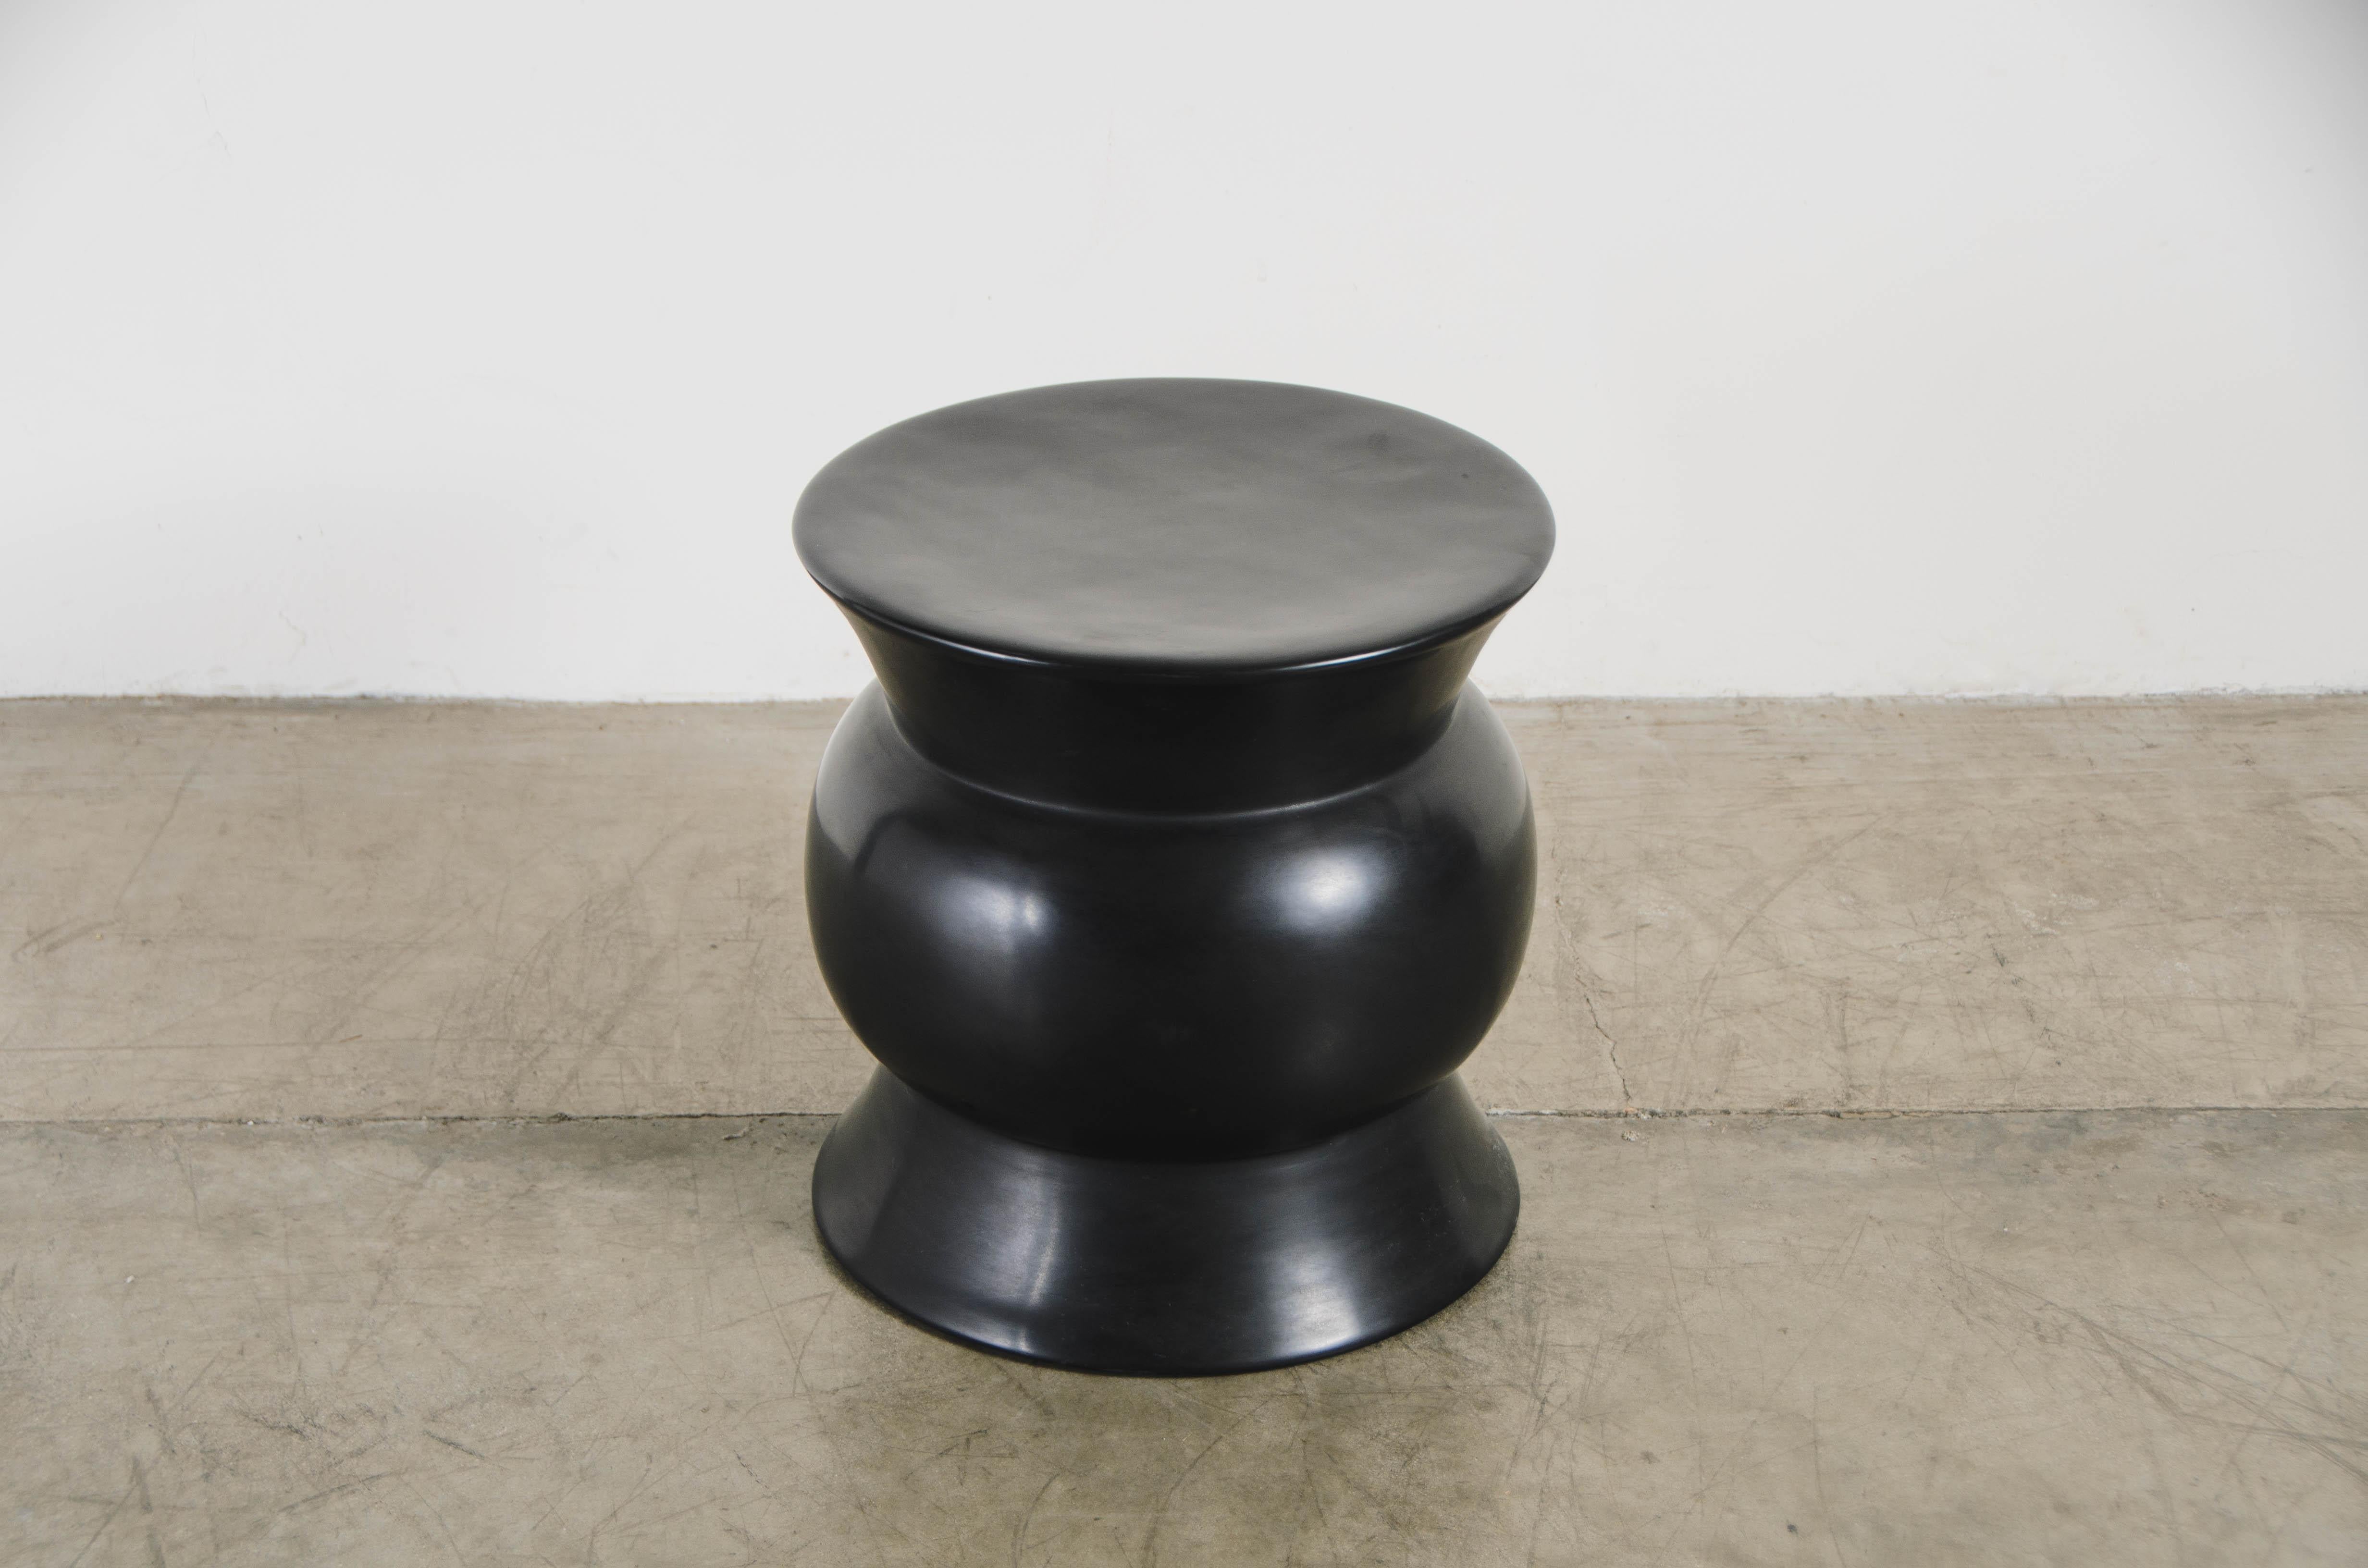 Zun drumstool 
Black lacquer 
Hand repoussé
Limited edition
Each piece is individually crafted and is unique. 
Lacquer is a technique that dates back to the Shang dynasty, circa 1600-1100 B.C. These pieces are made with at least 60 coats of